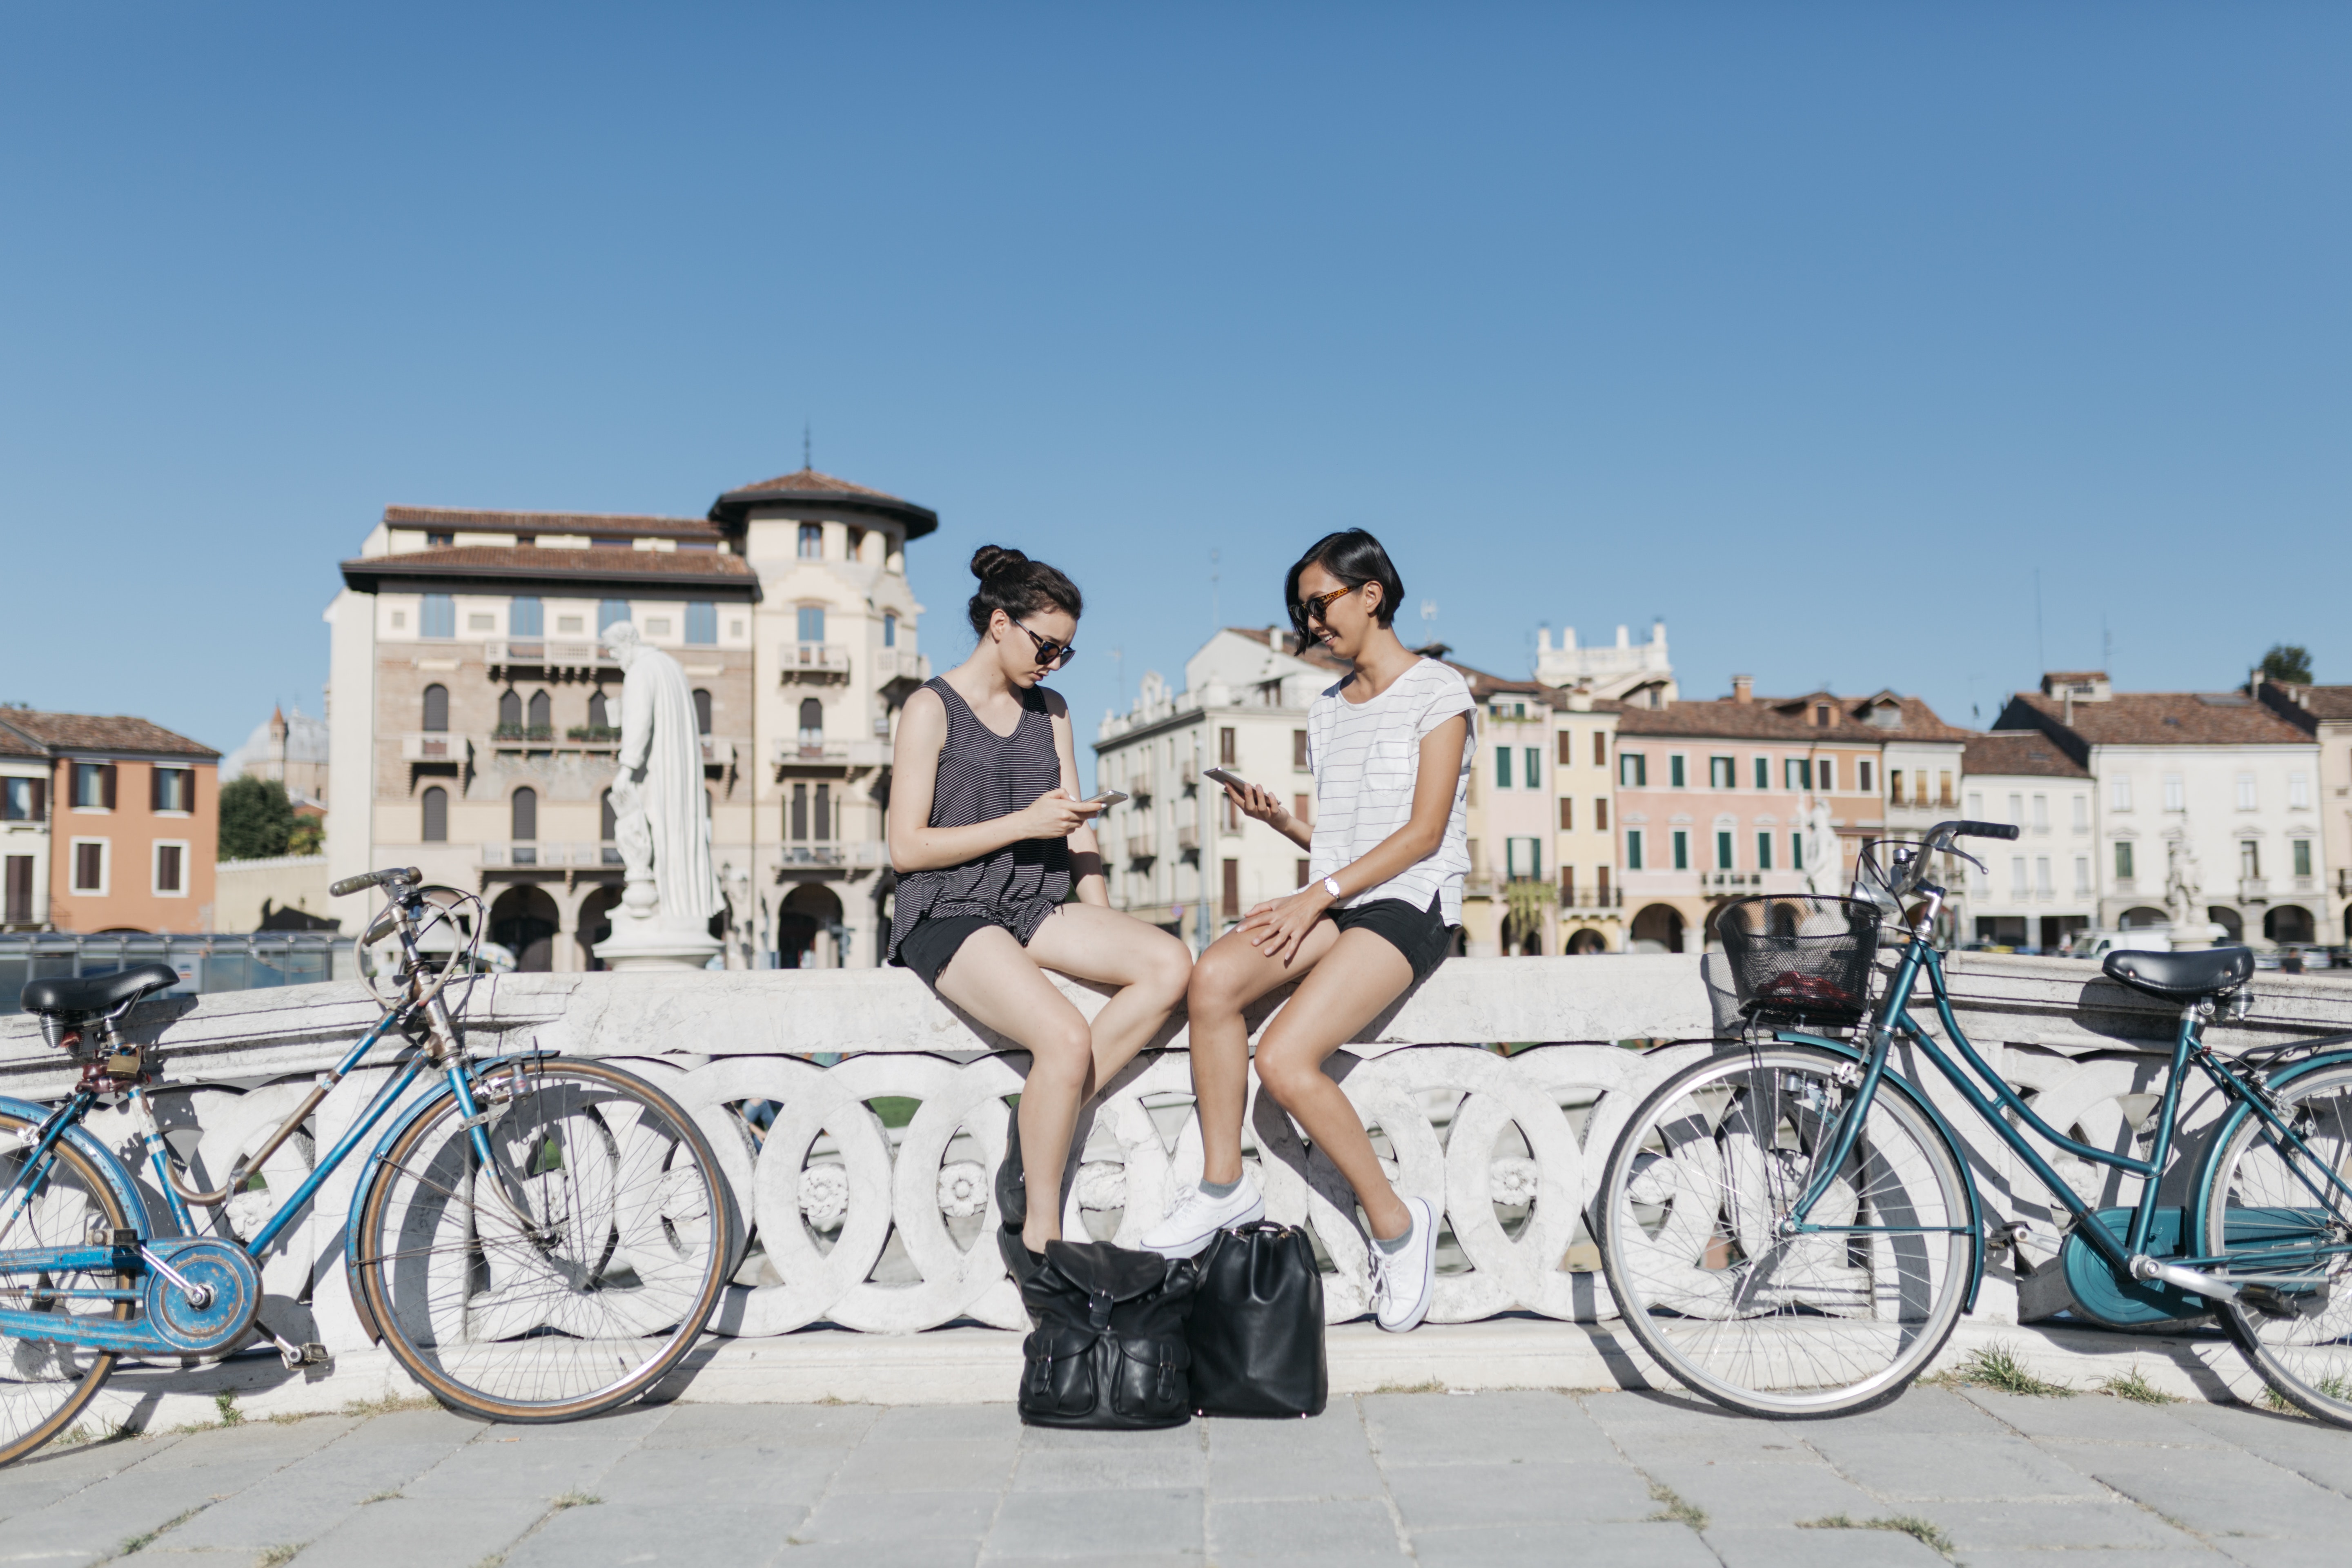 Italy, Padua, two young tourists sitting on railing looking at cell phones